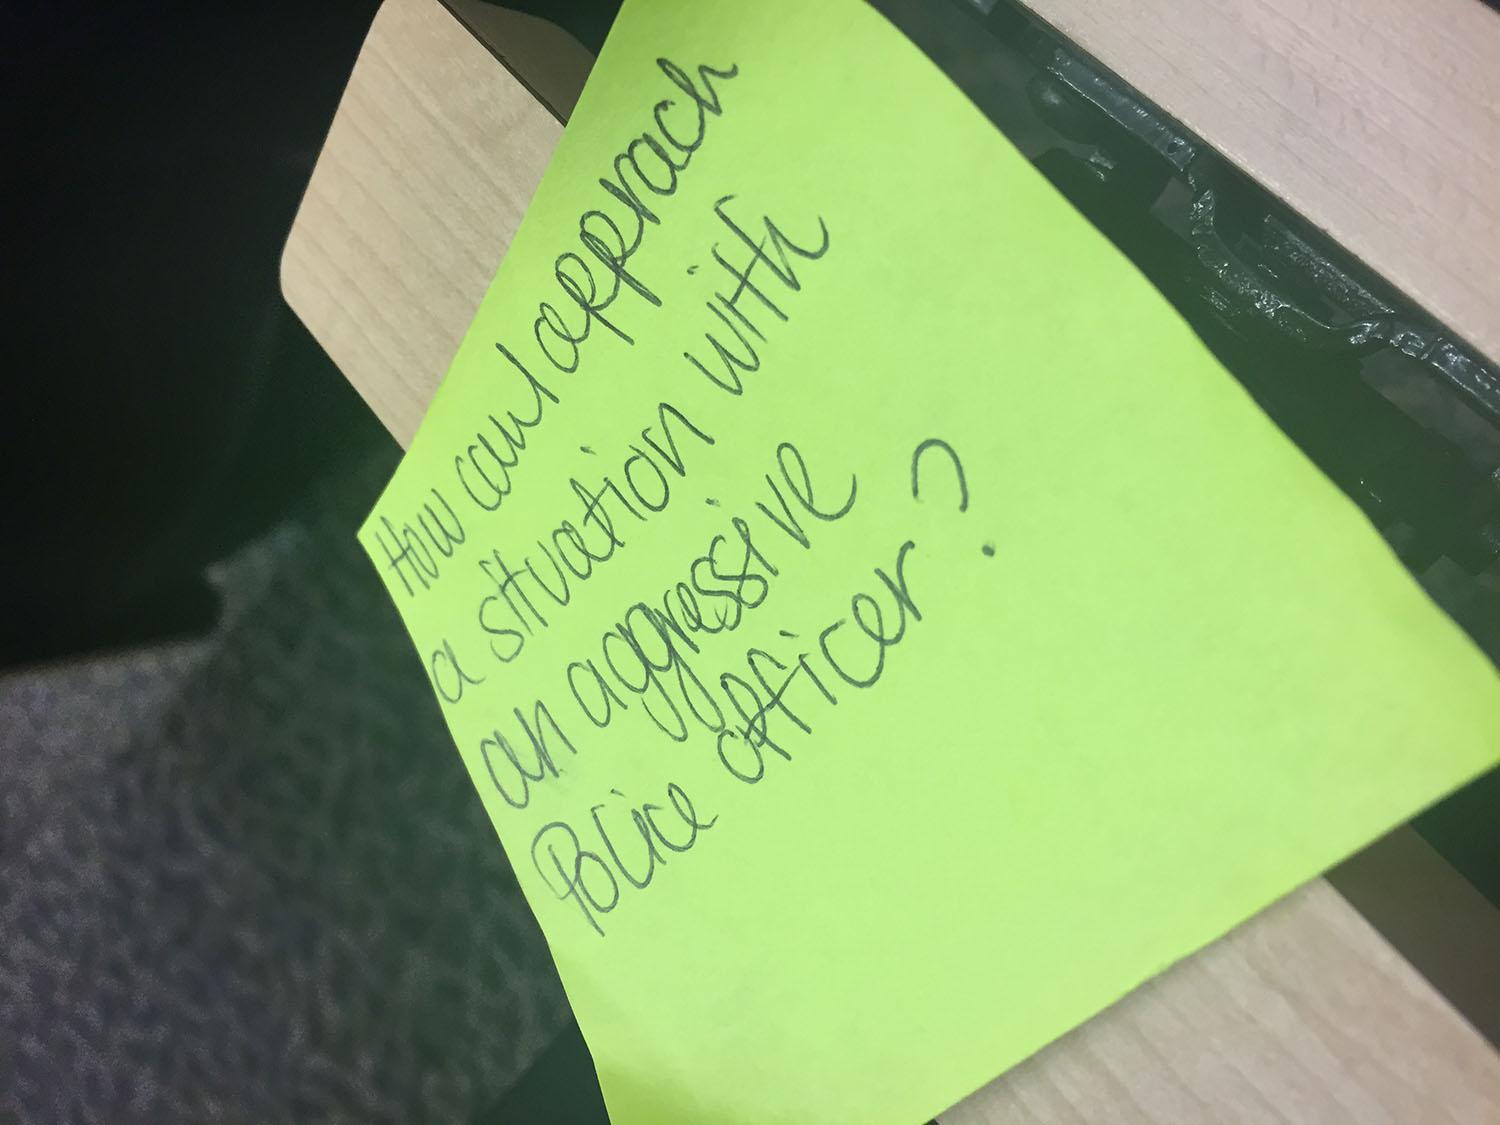 BSA gave students sticky notes with questions on them that they could ask the officers.